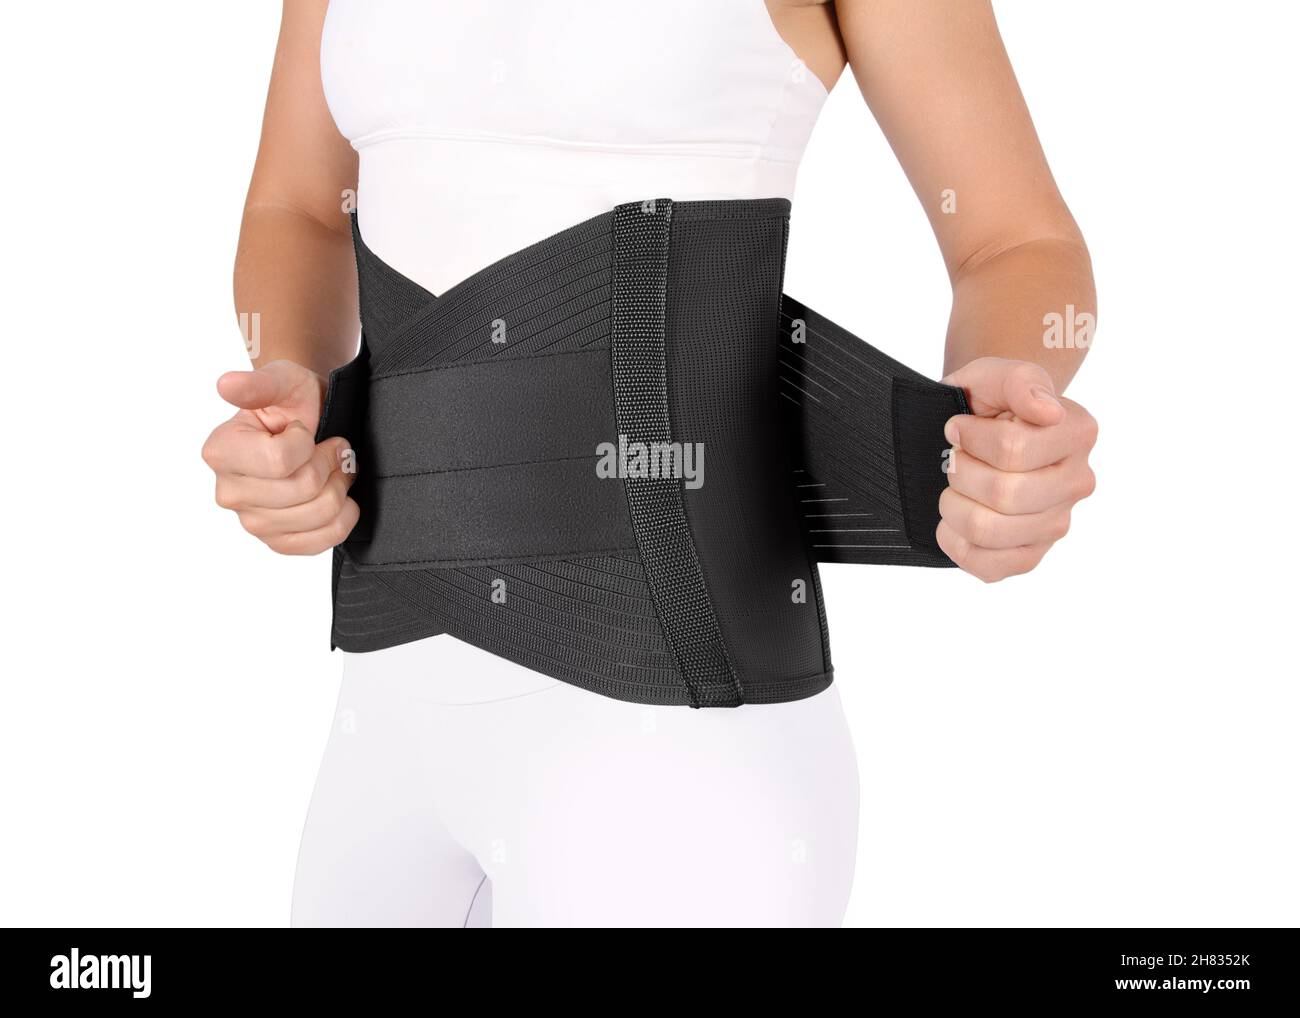 Brace back Cut Out Stock Images & Pictures - Alamy